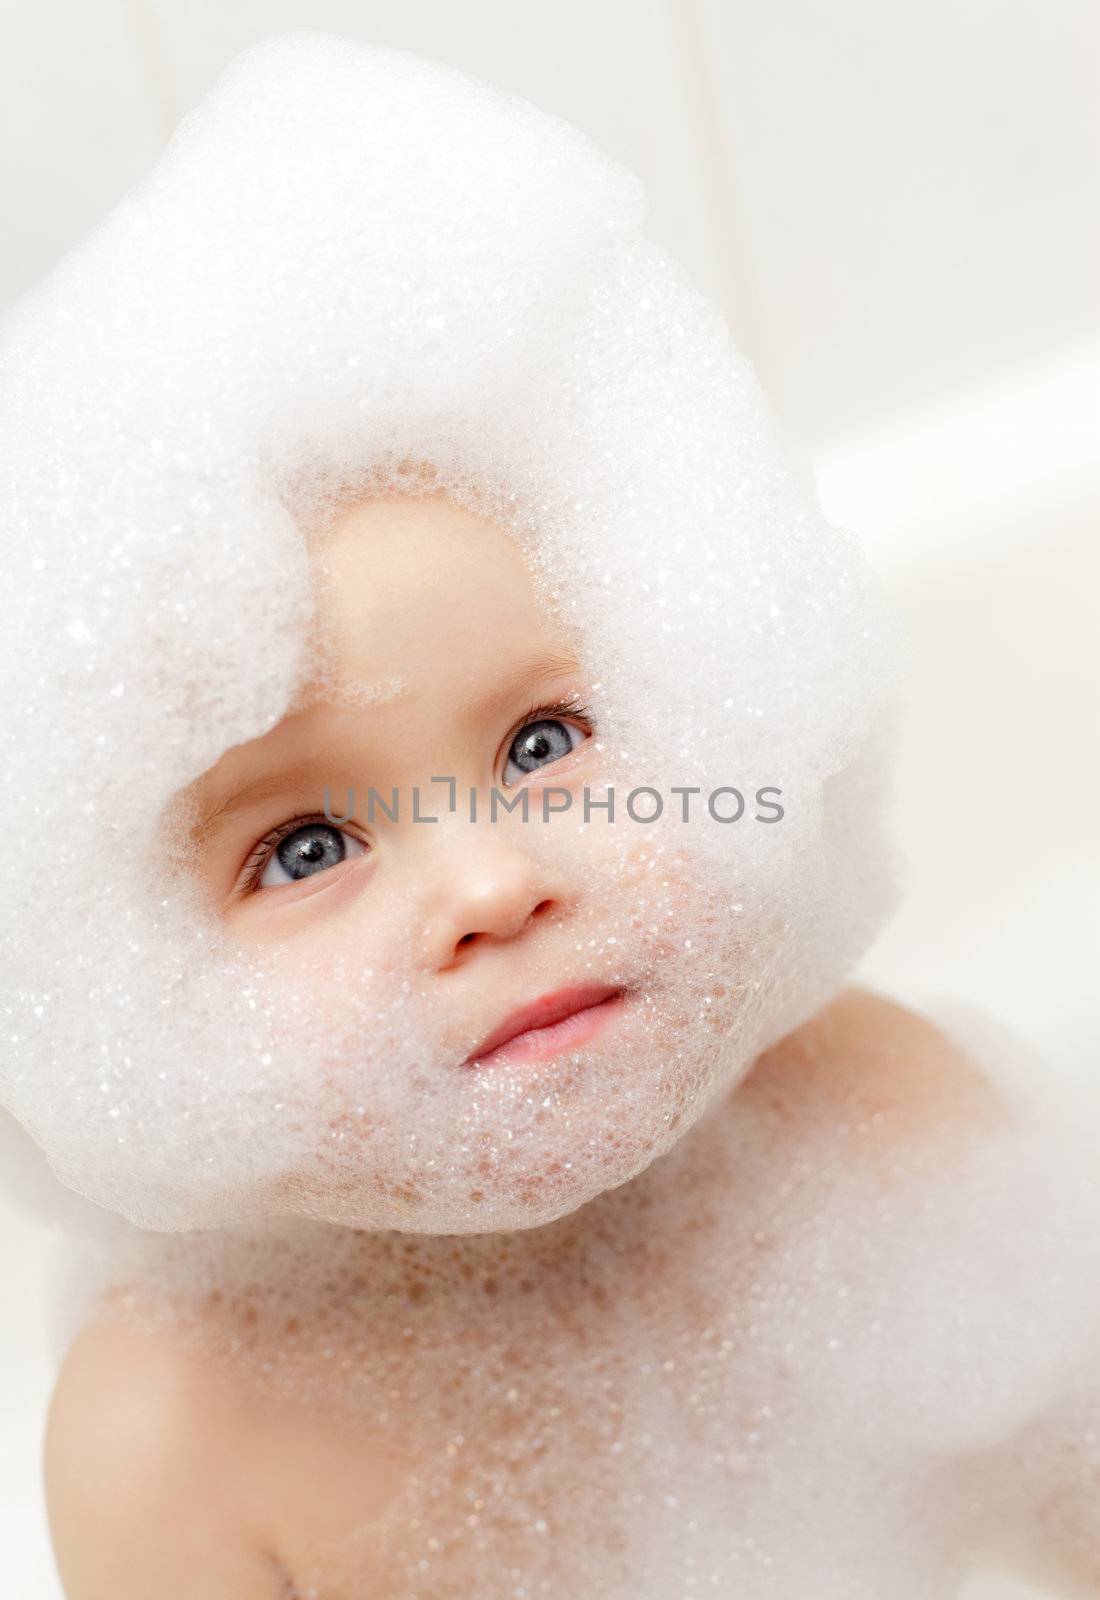 Child in soapsuds by naumoid